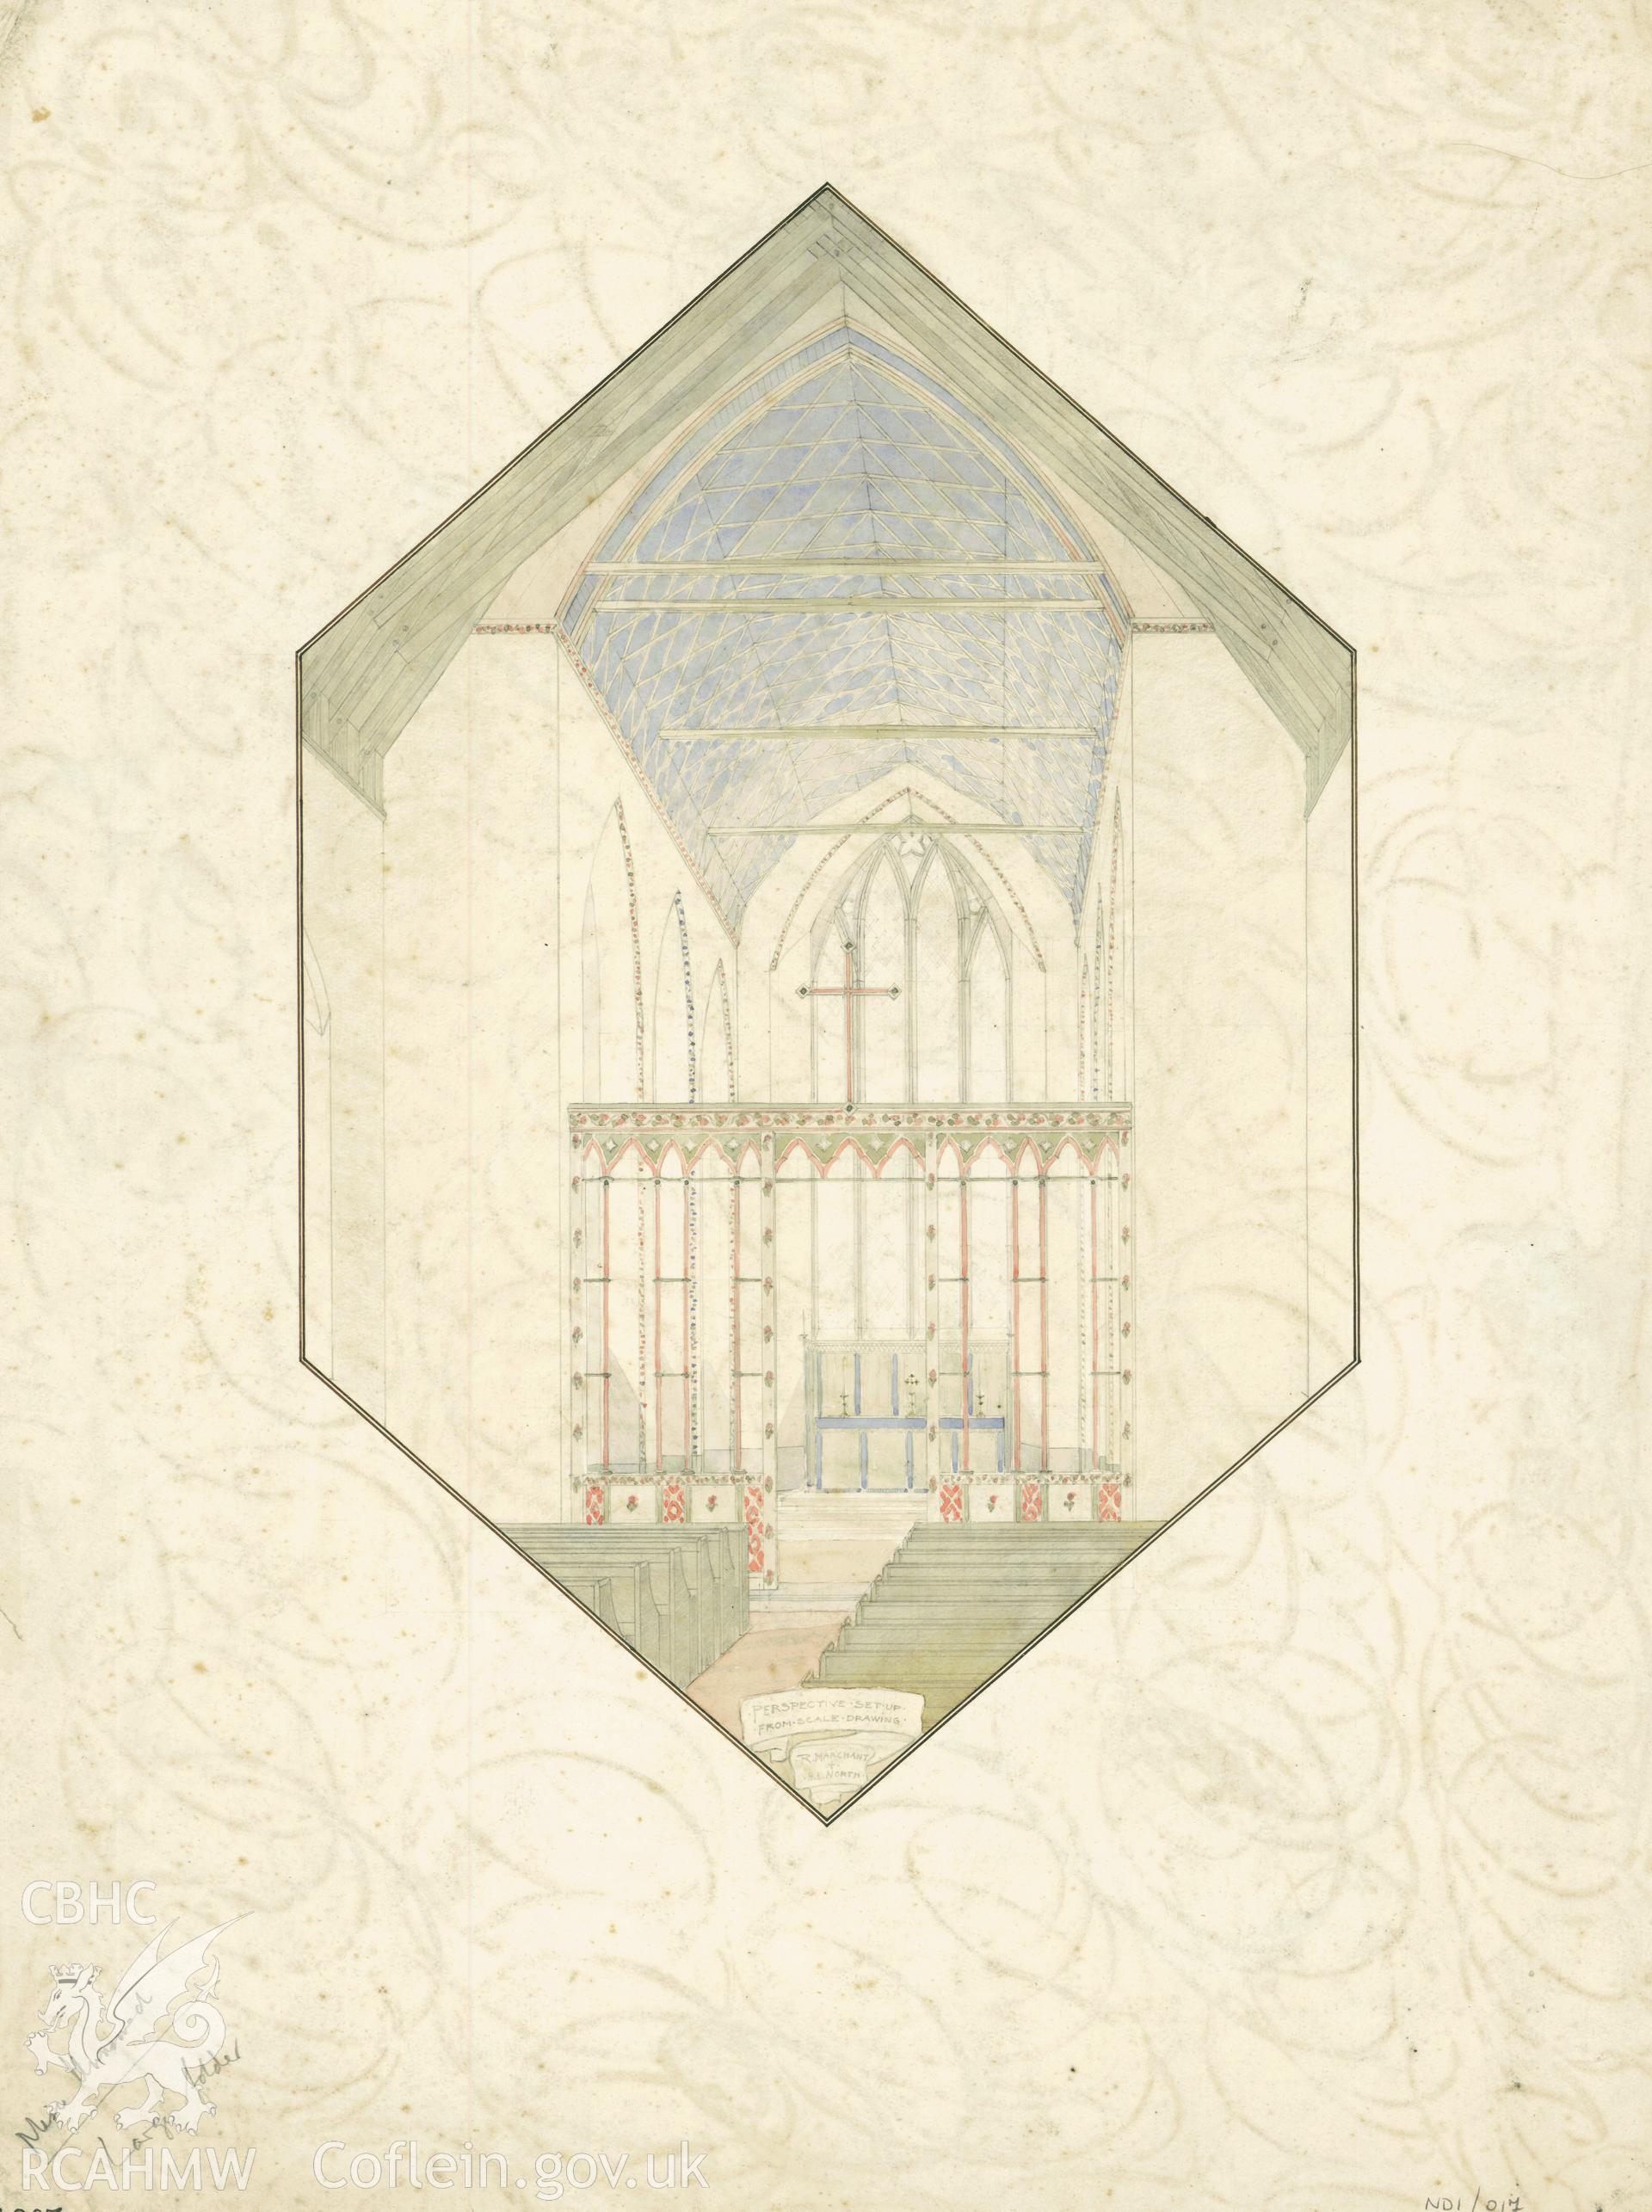 Perspective drawing of interior of unidentified church, no scale, pencil with coloured wash on paper.